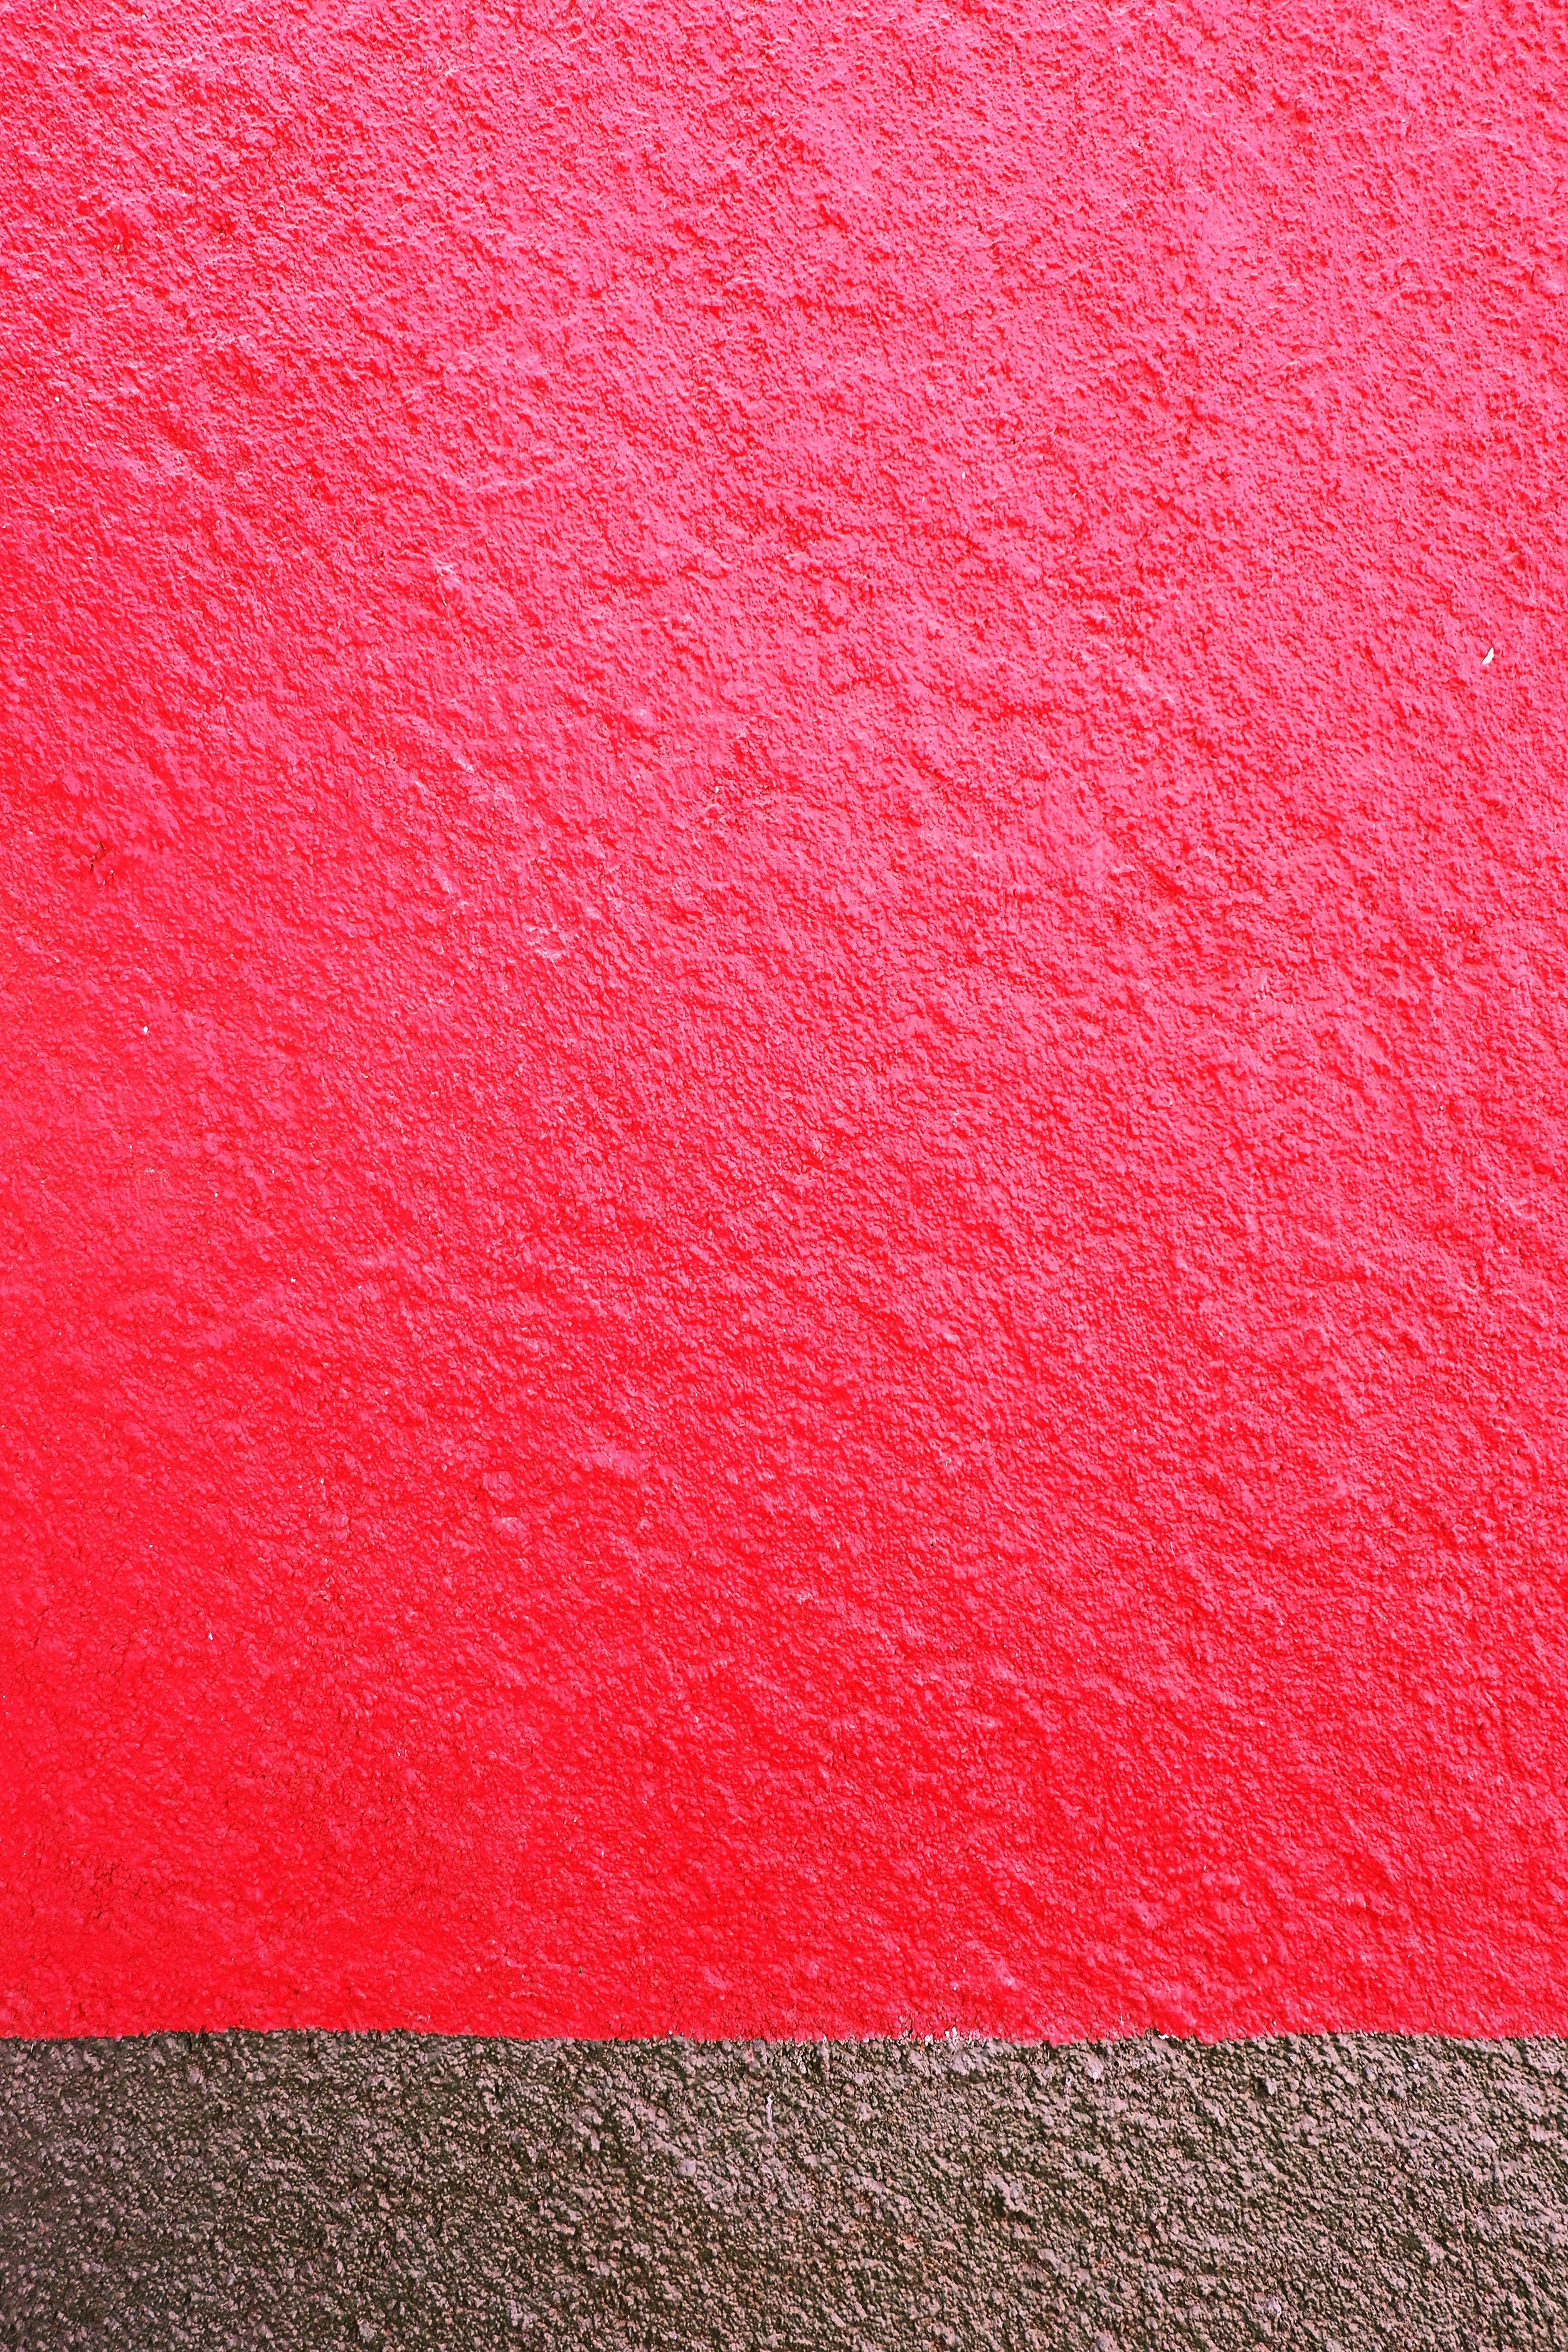 texture, pink background, textures, wall